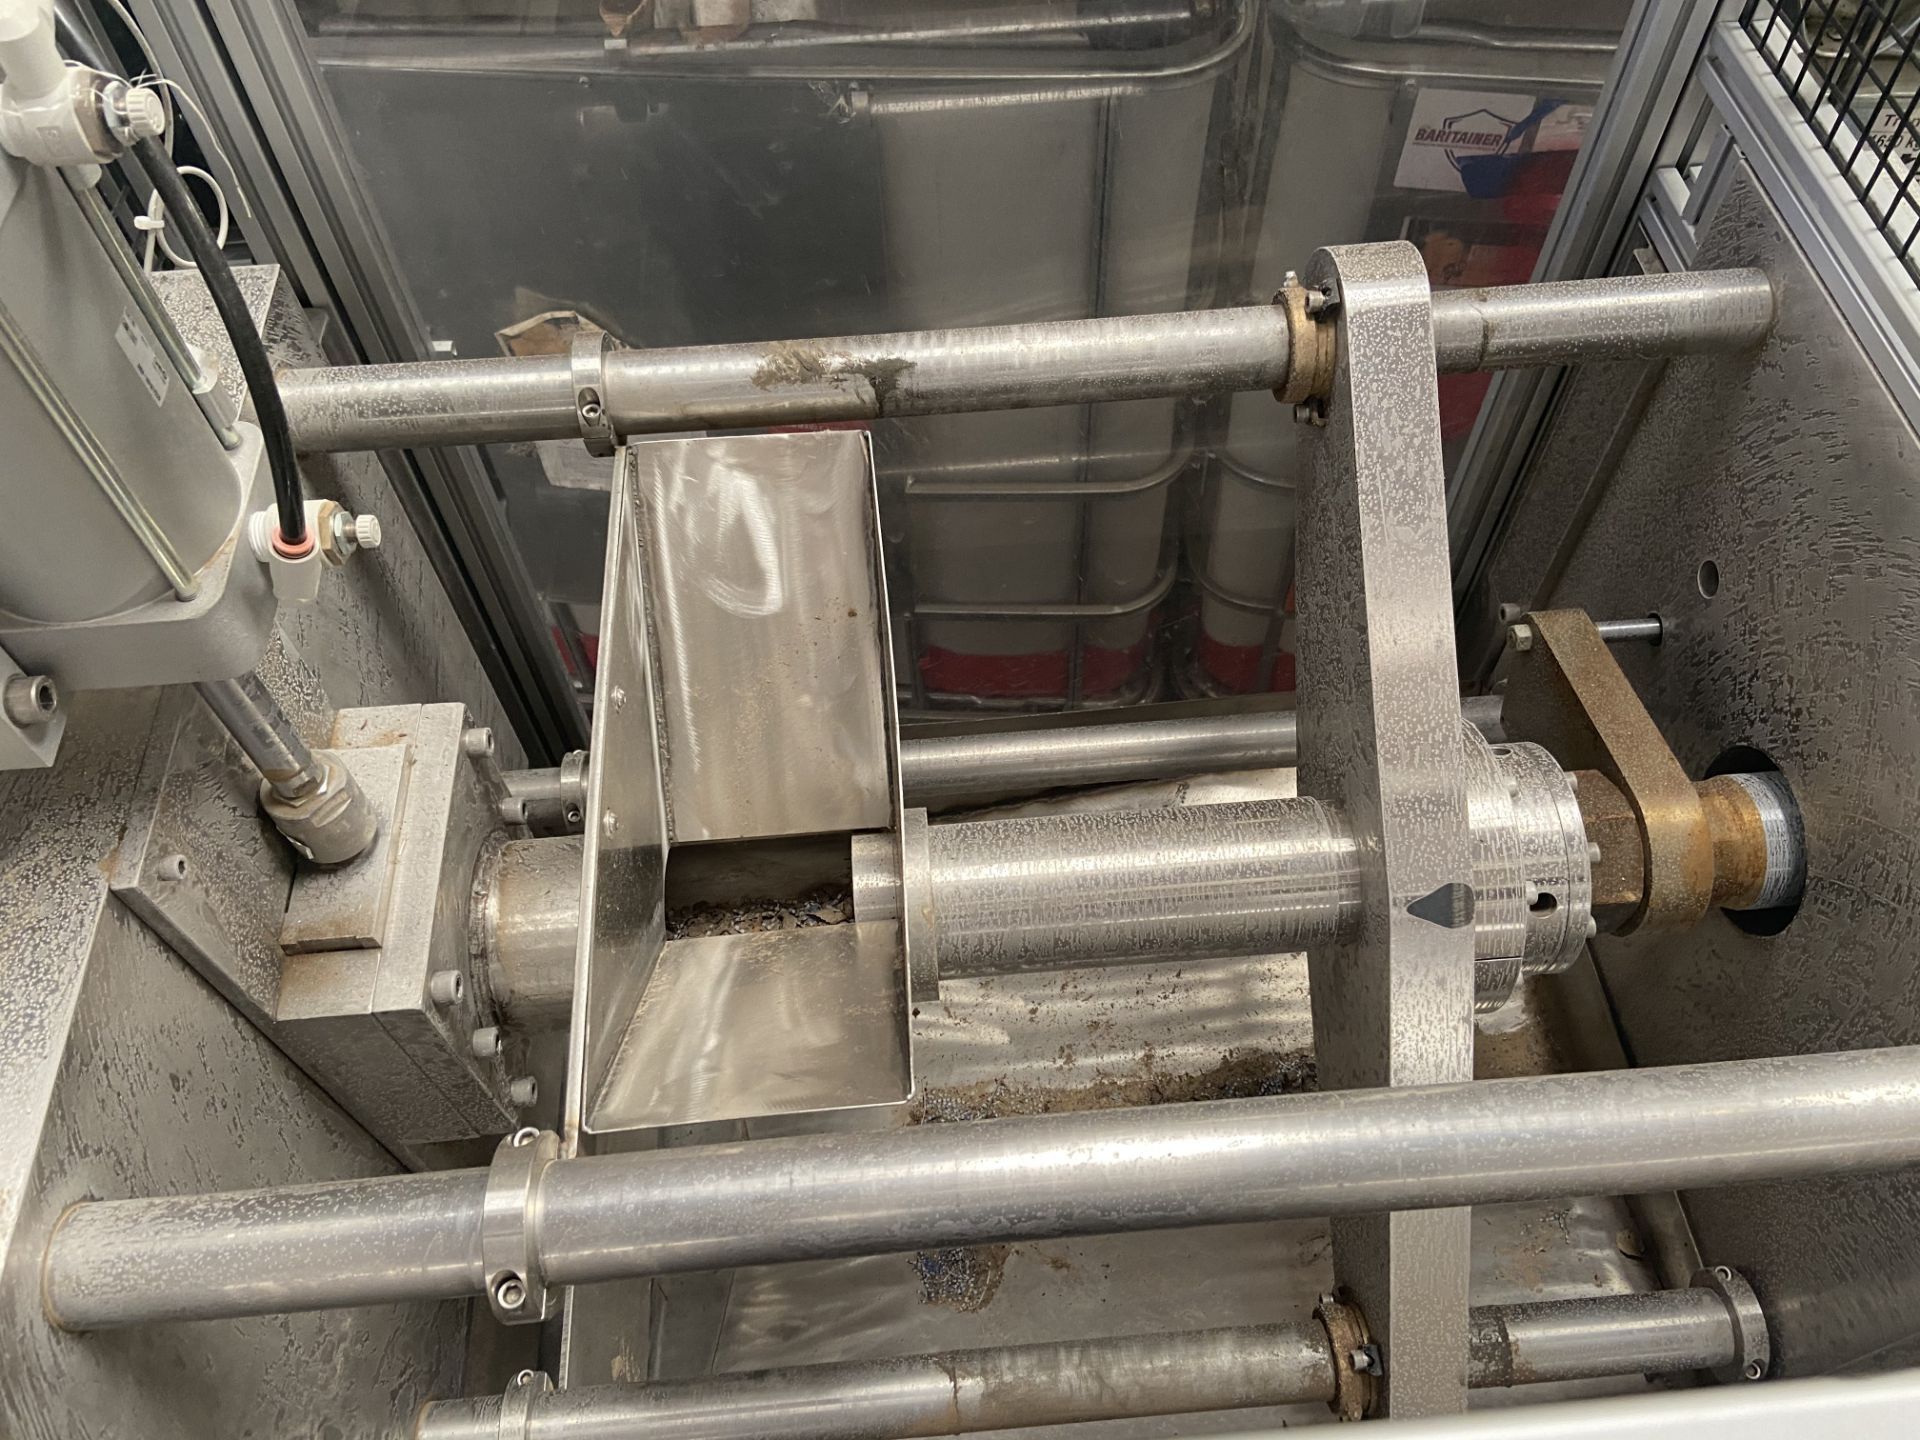 (Located in Conifer, CO) Kyntronics Hydraulic Actuator Press, Serial# 34187-01-001, Year 2019 - Image 7 of 7